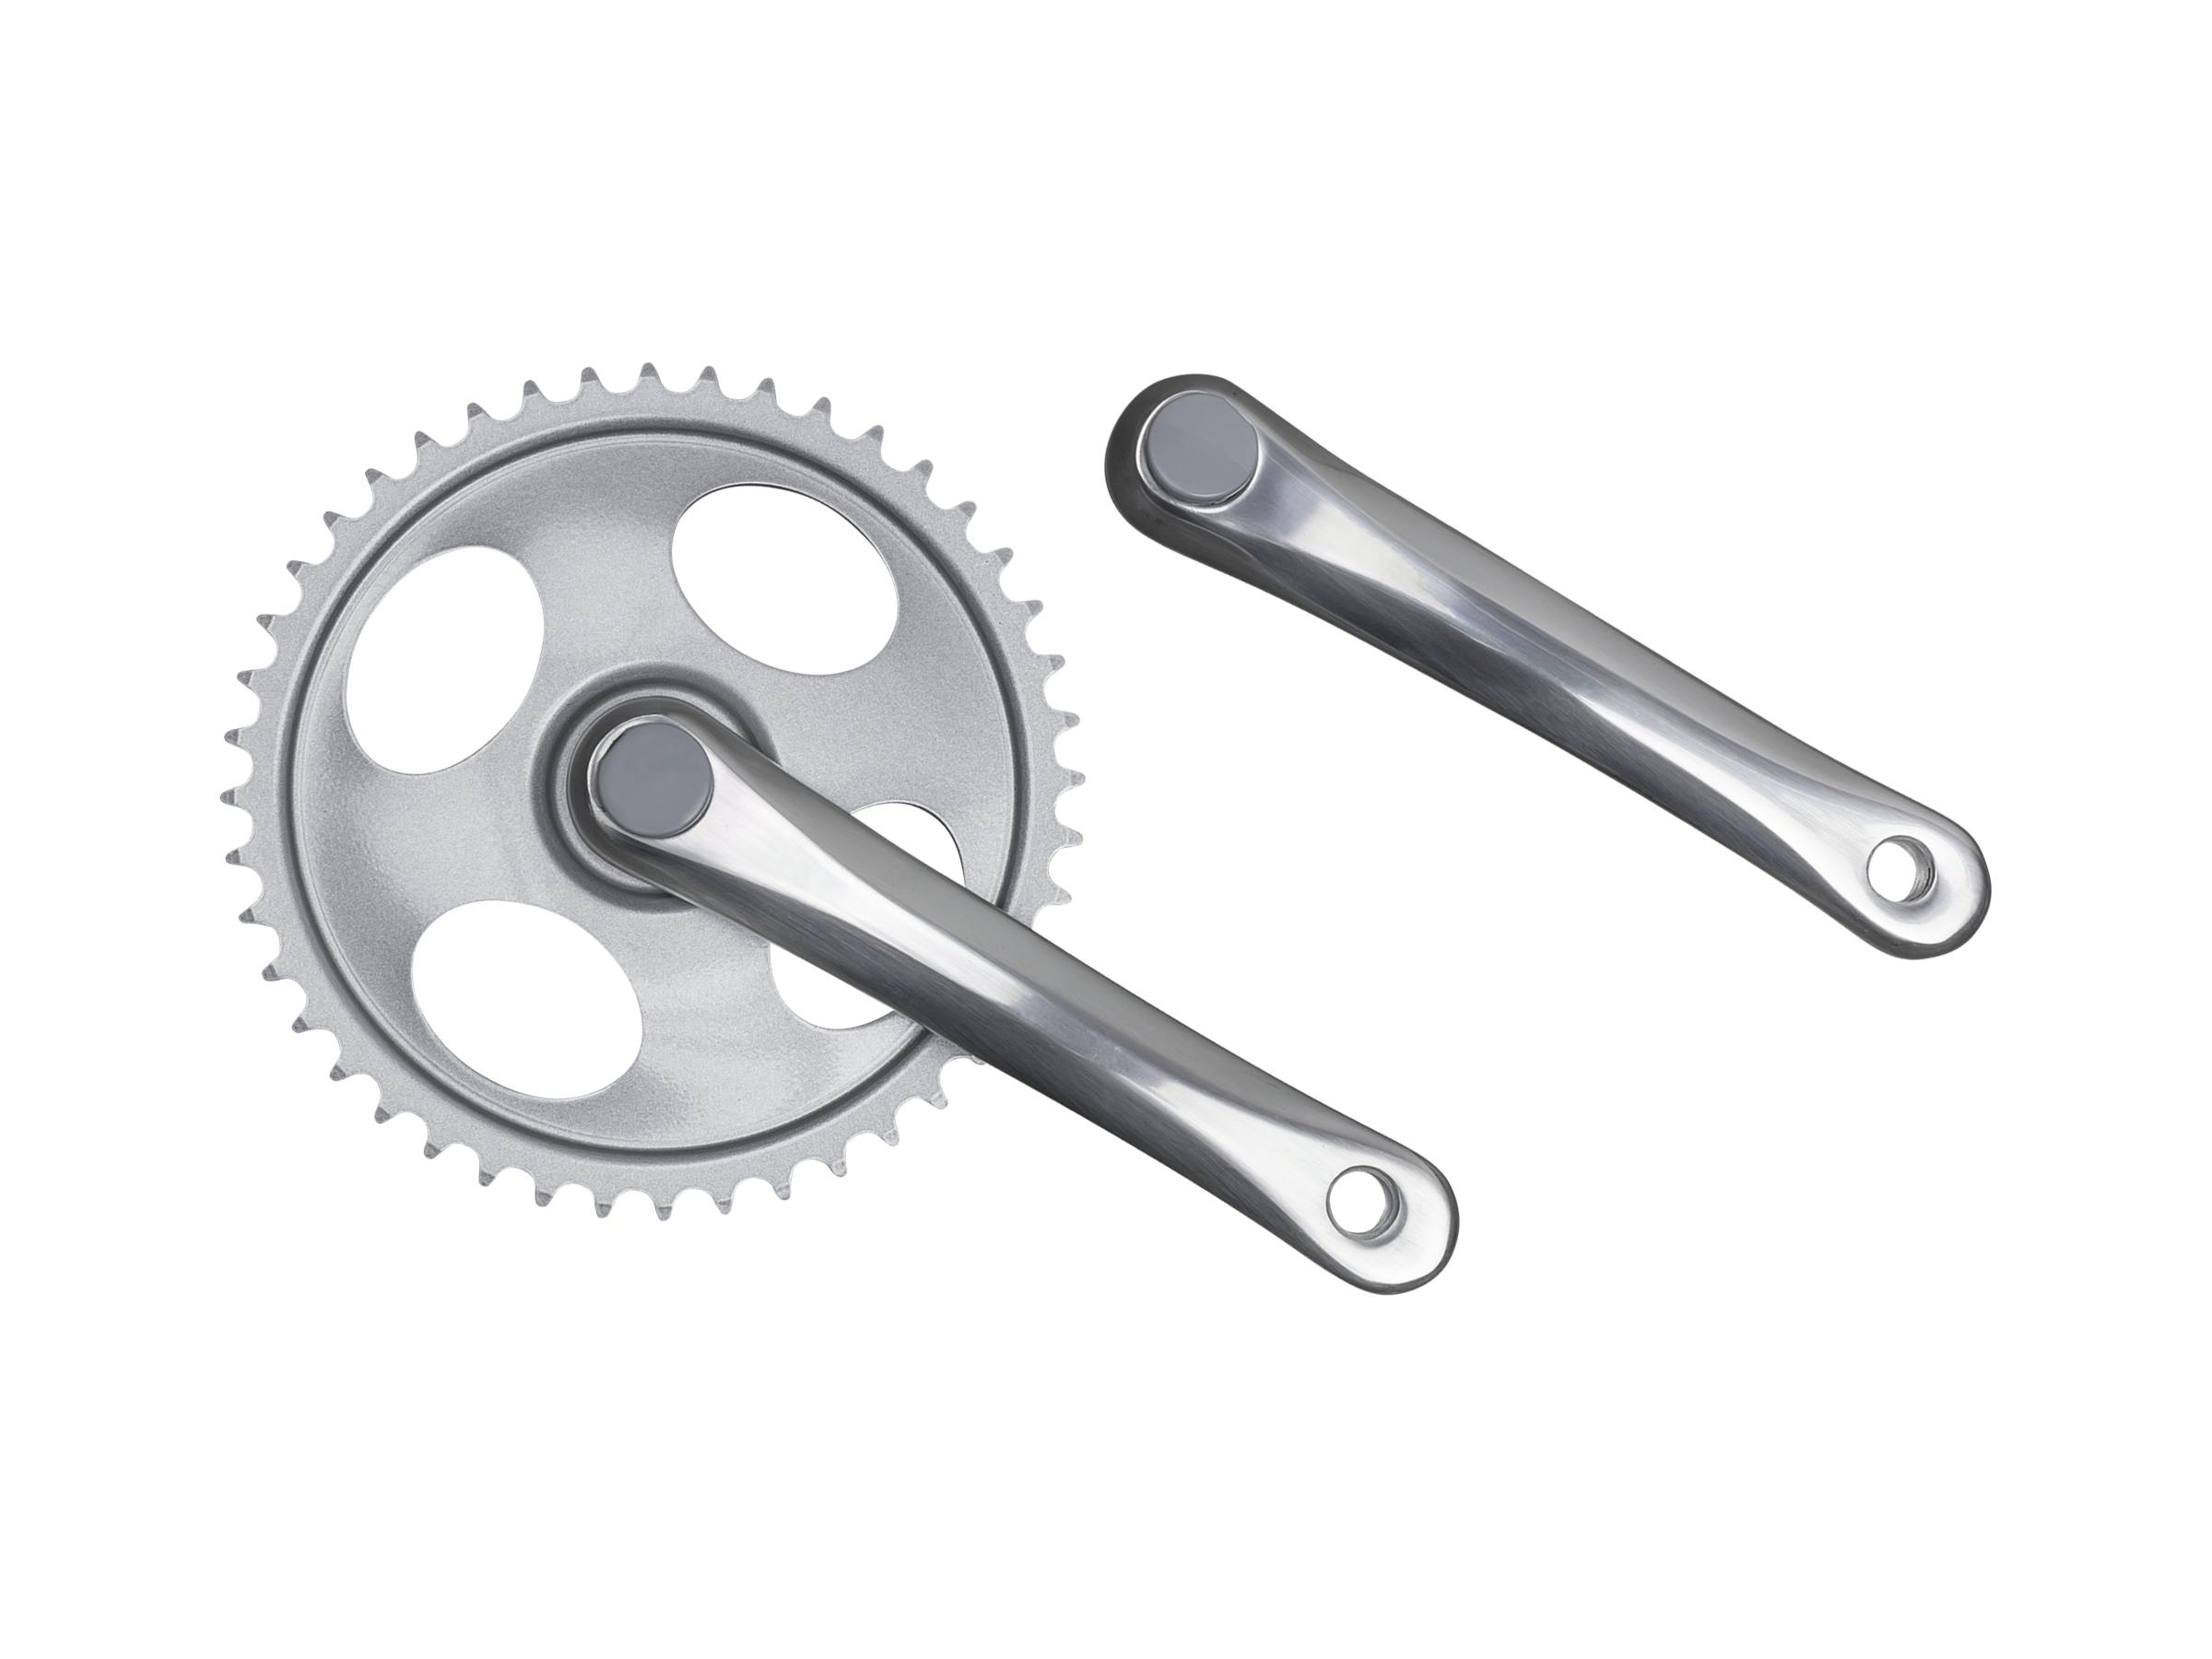 Crank Electra Townie w/Out Guide 170mm Silver